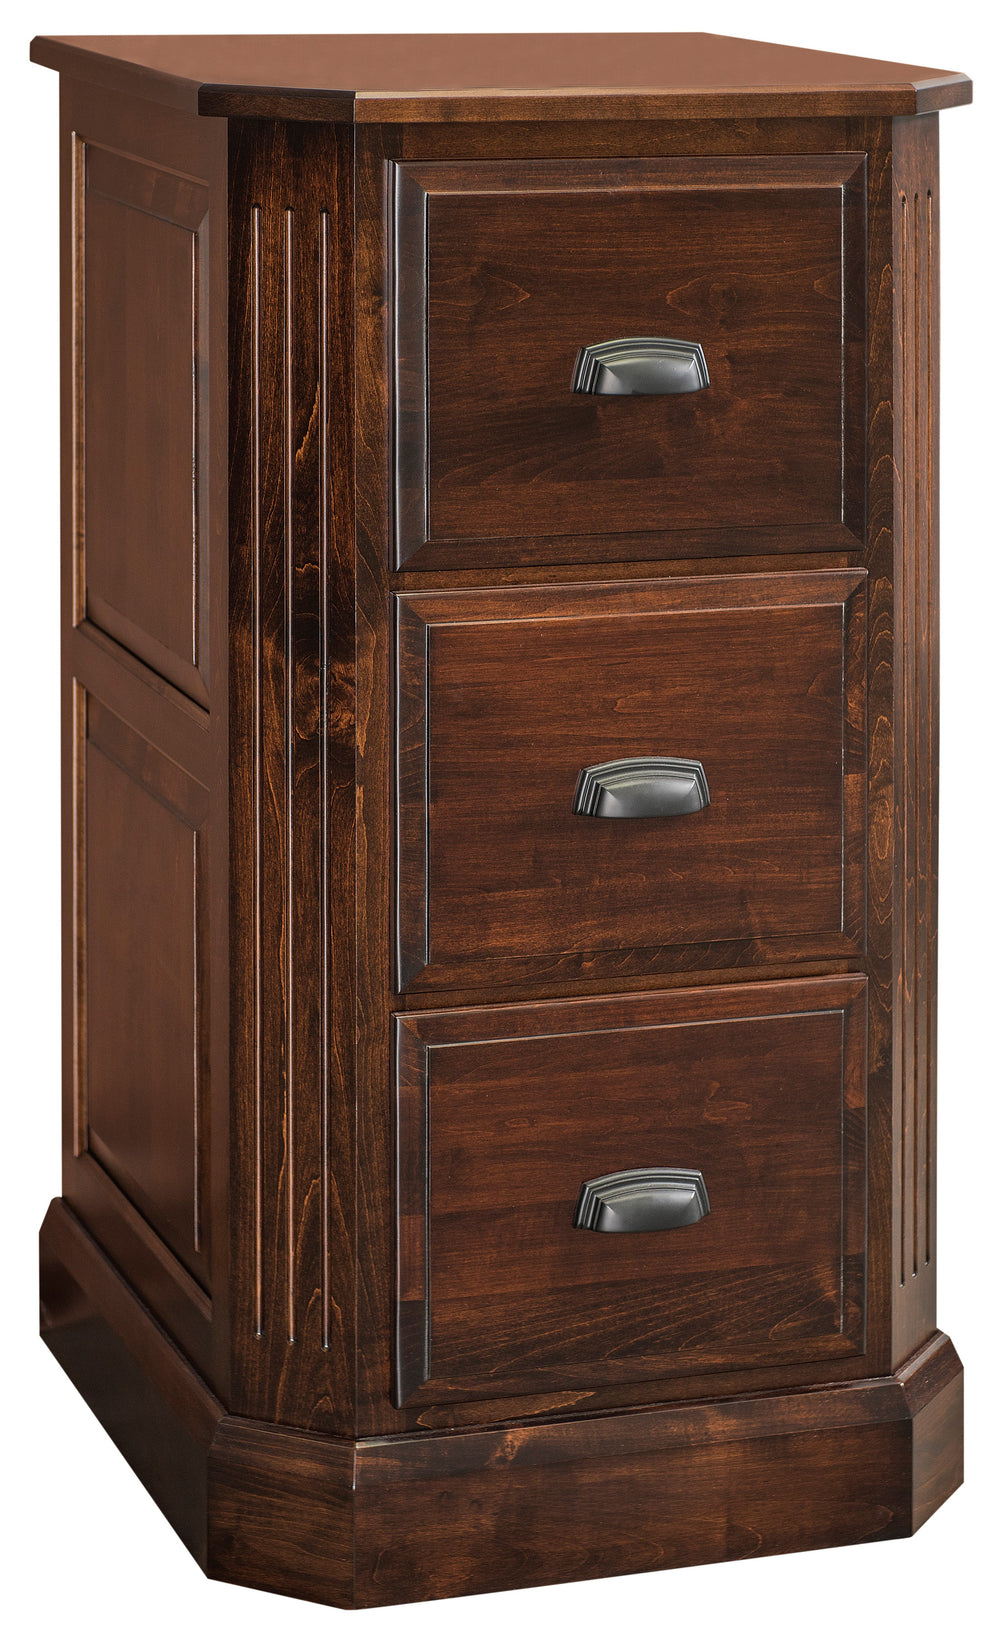 QW Amish Classic Saturn File Cabinet - Choose your Height